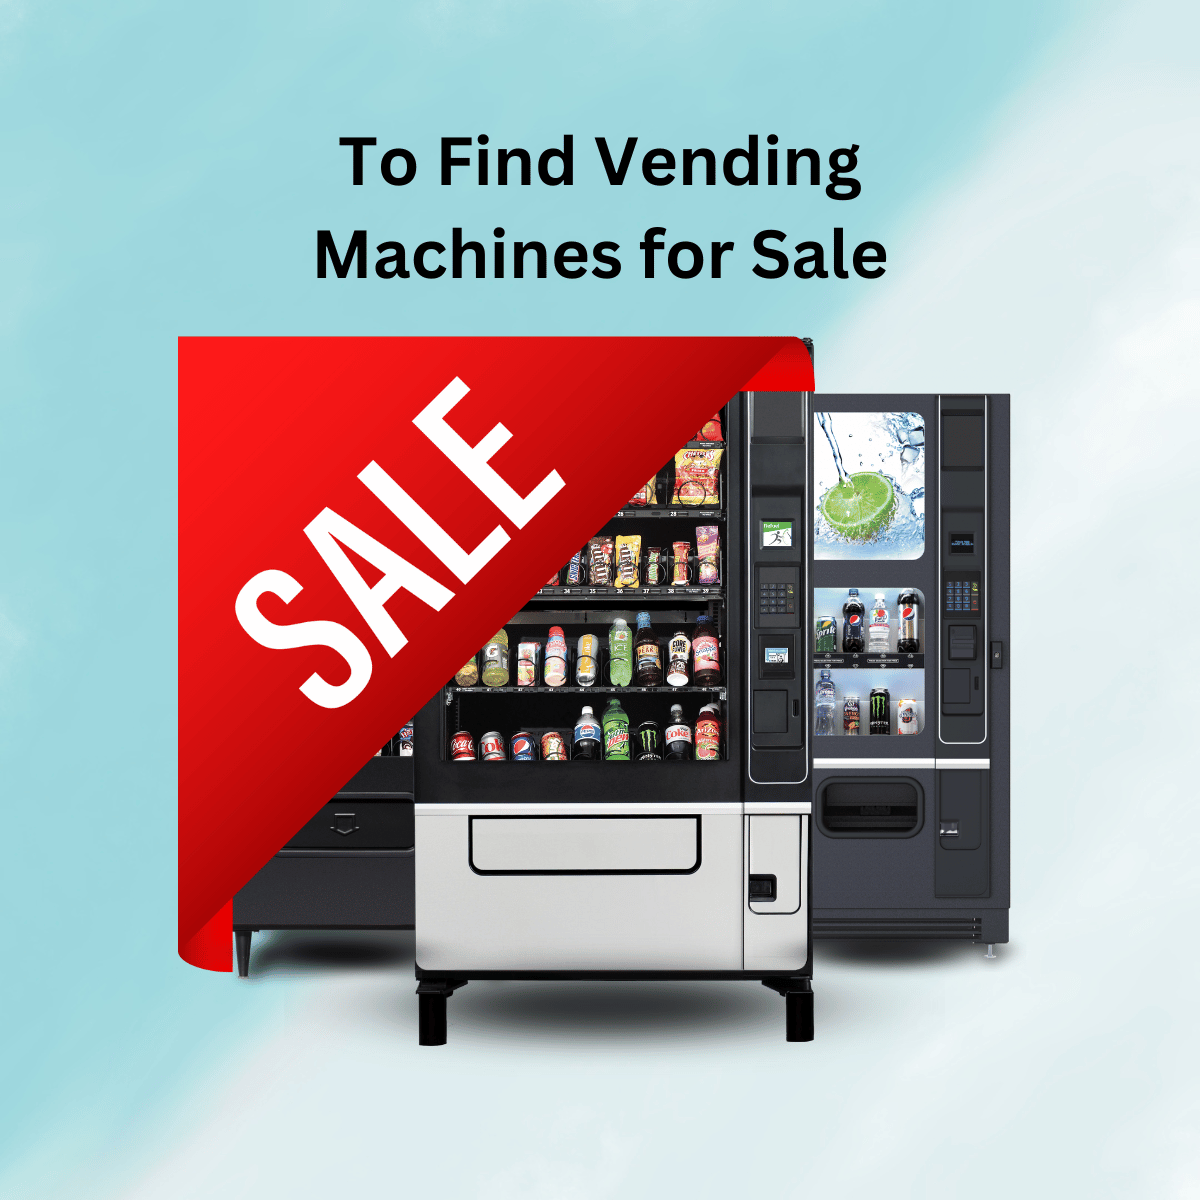 WHERE SHOULD YOU LOOK FOR VENDING MACHINES FOR SALE?